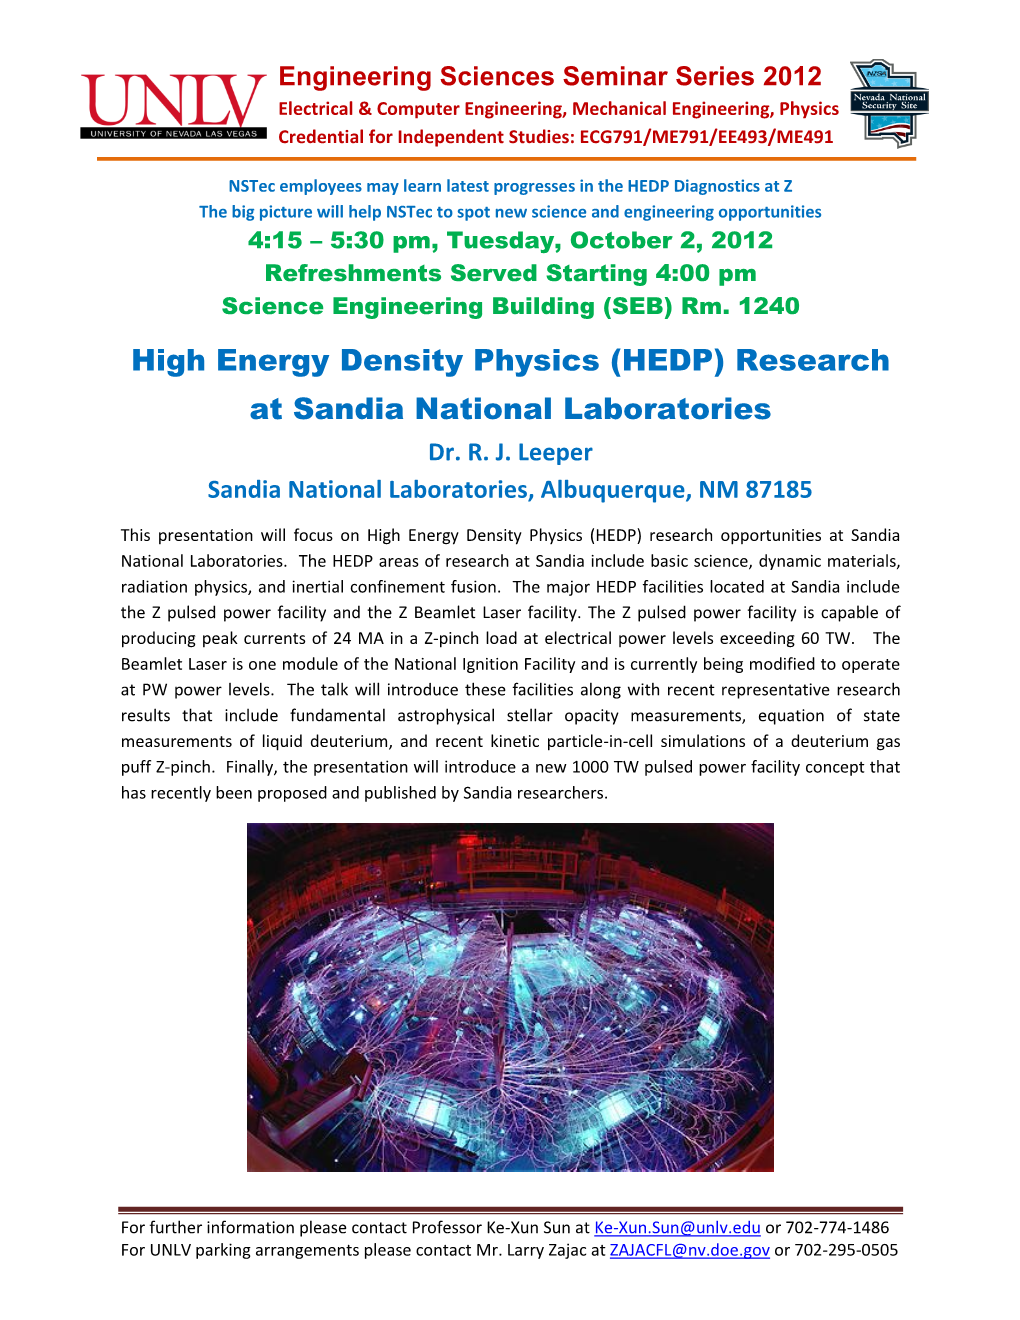 High Energy Density Physics (HEDP) Research at Sandia National Laboratories Dr